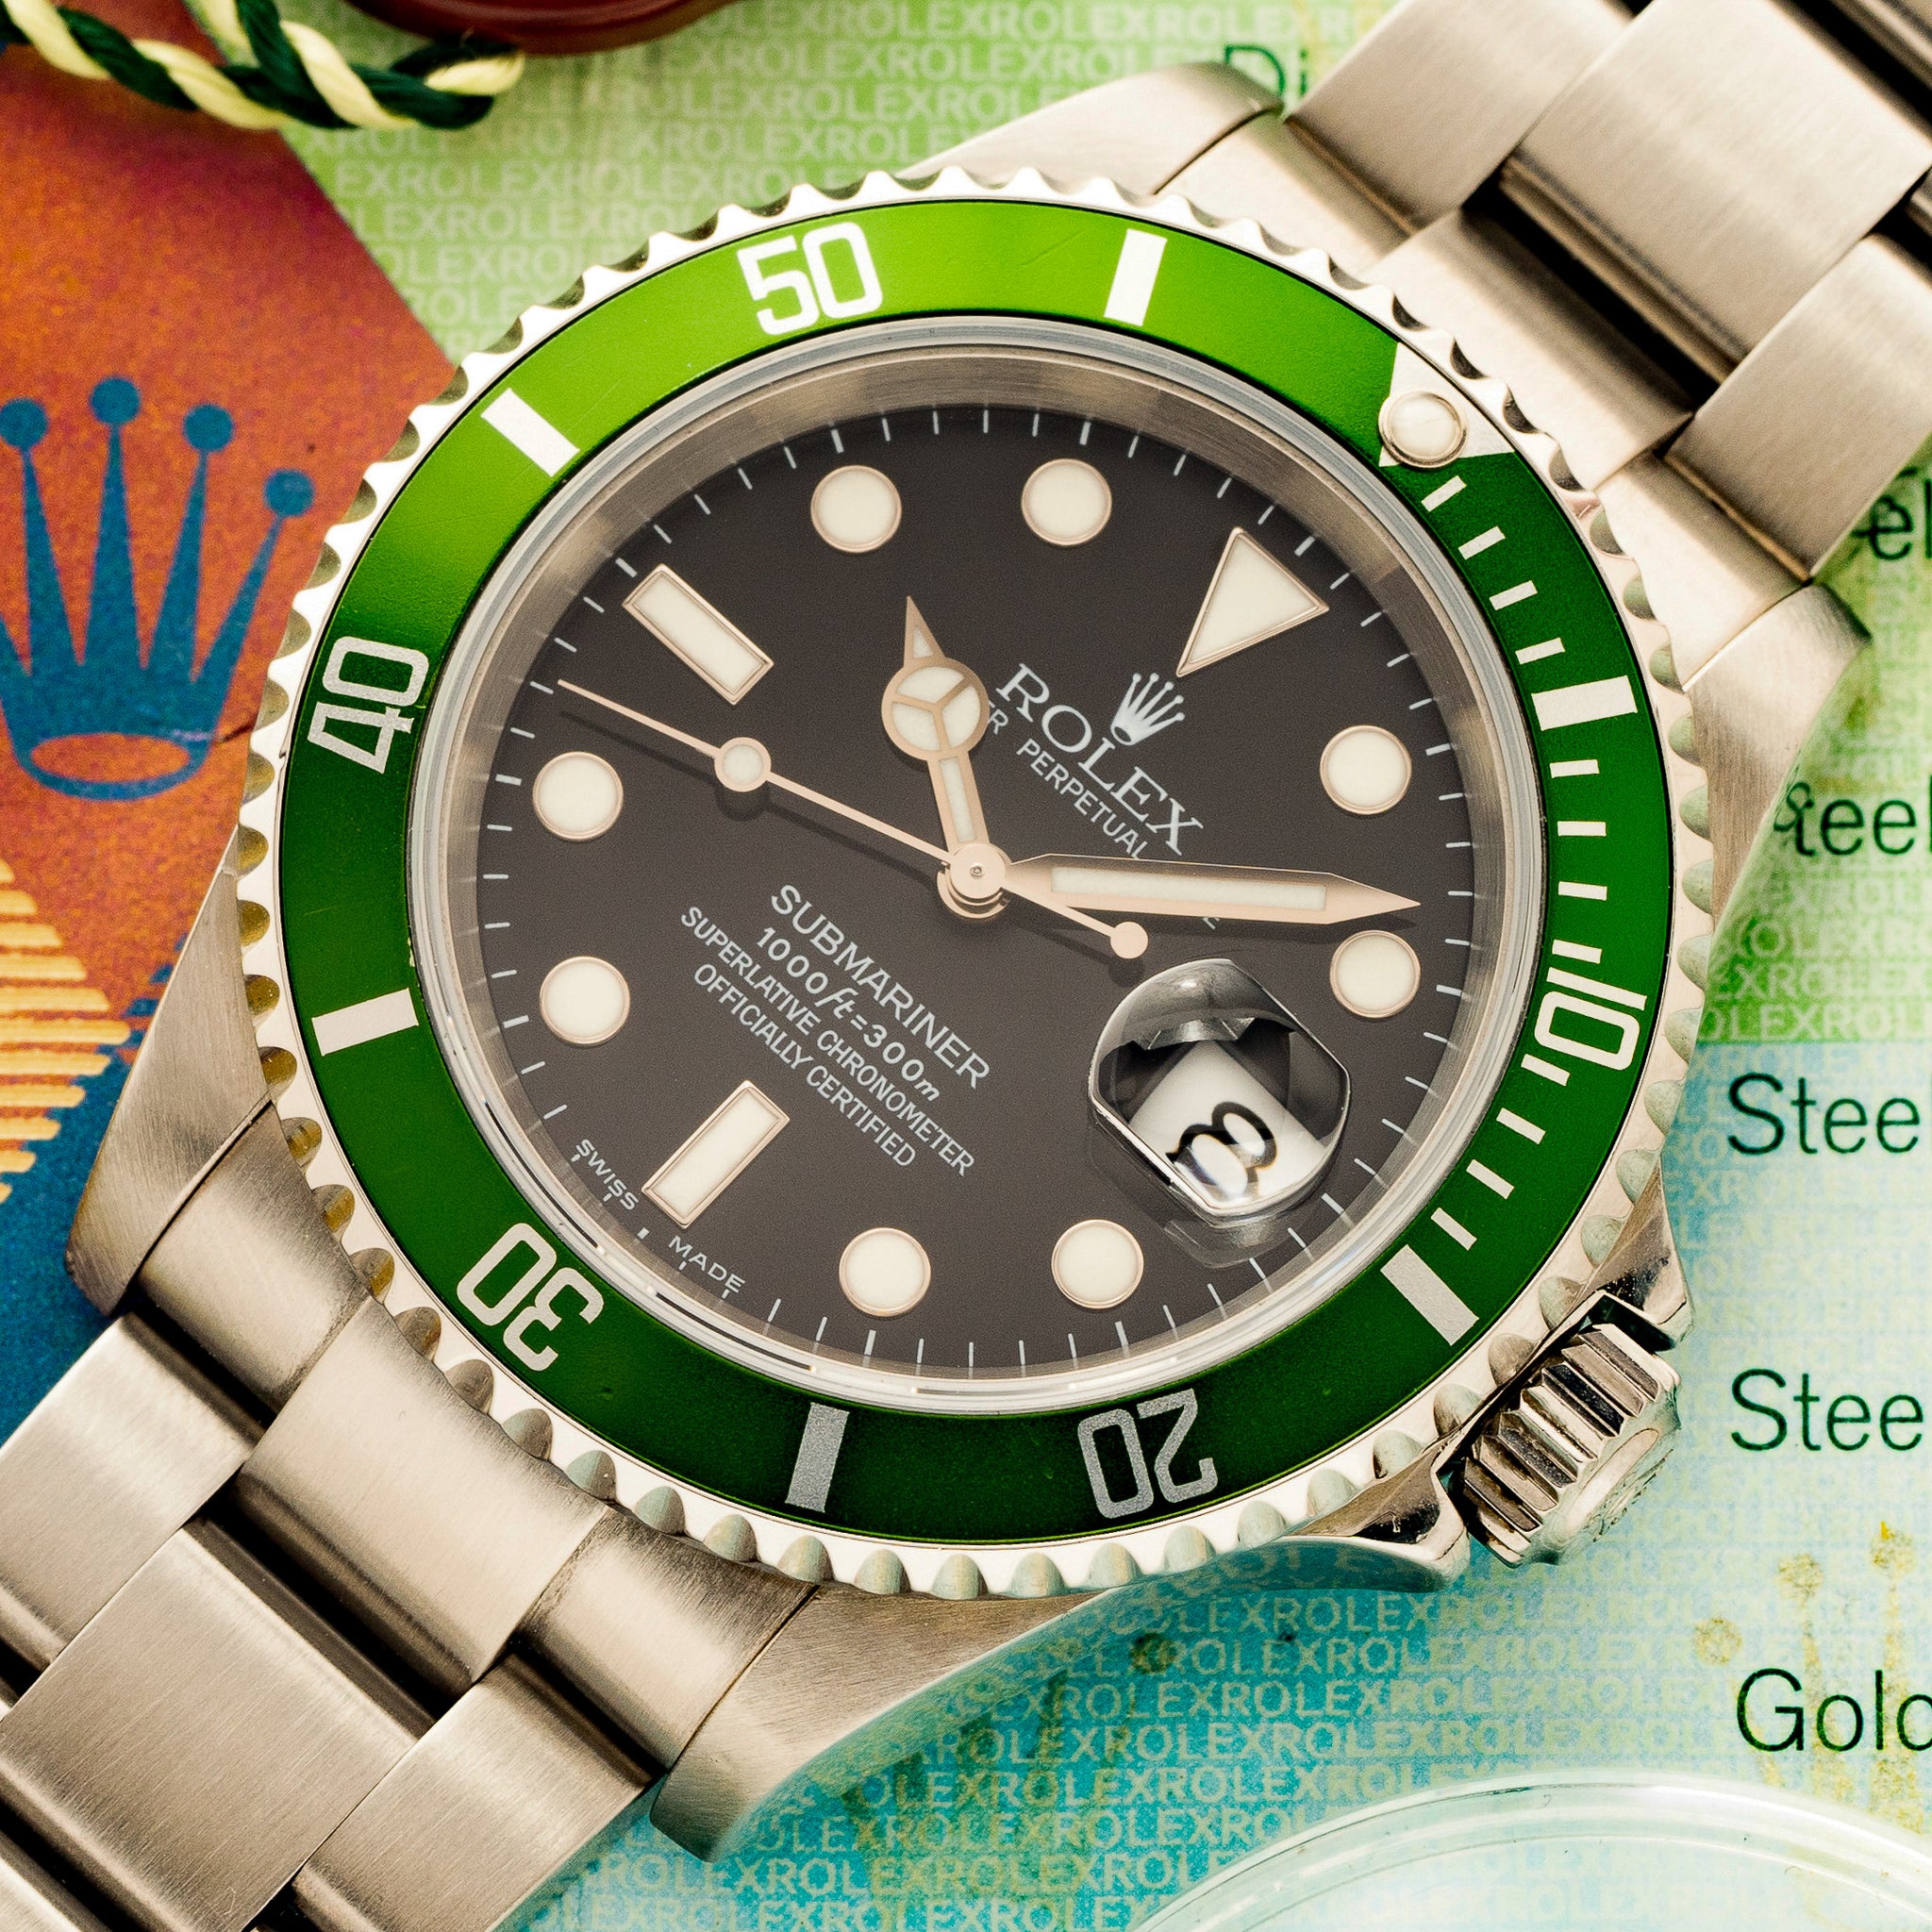 Rolex Anniversary Submariner 16610LV "Kermit Flat Four" - w/Papers